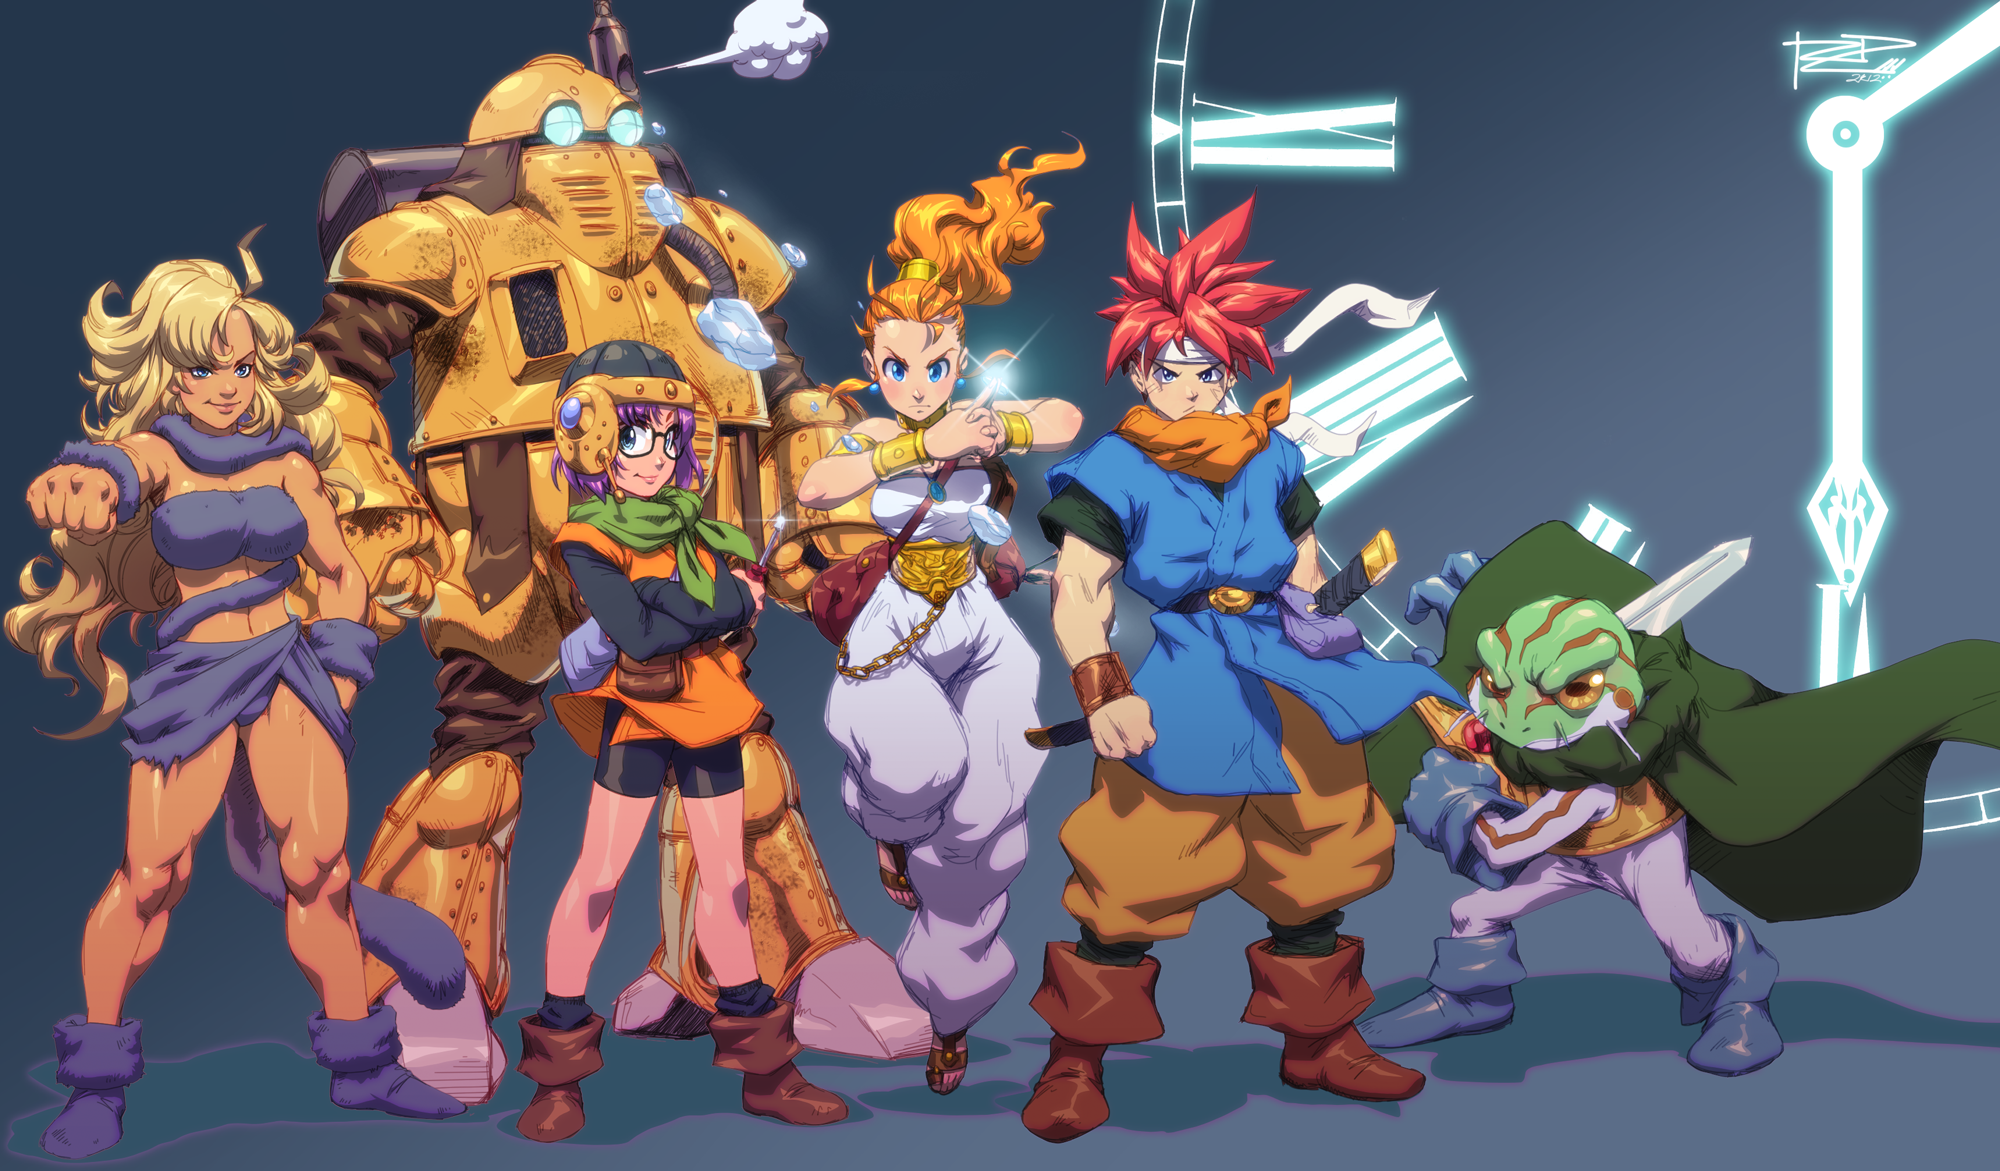 download chrono trigger for switch